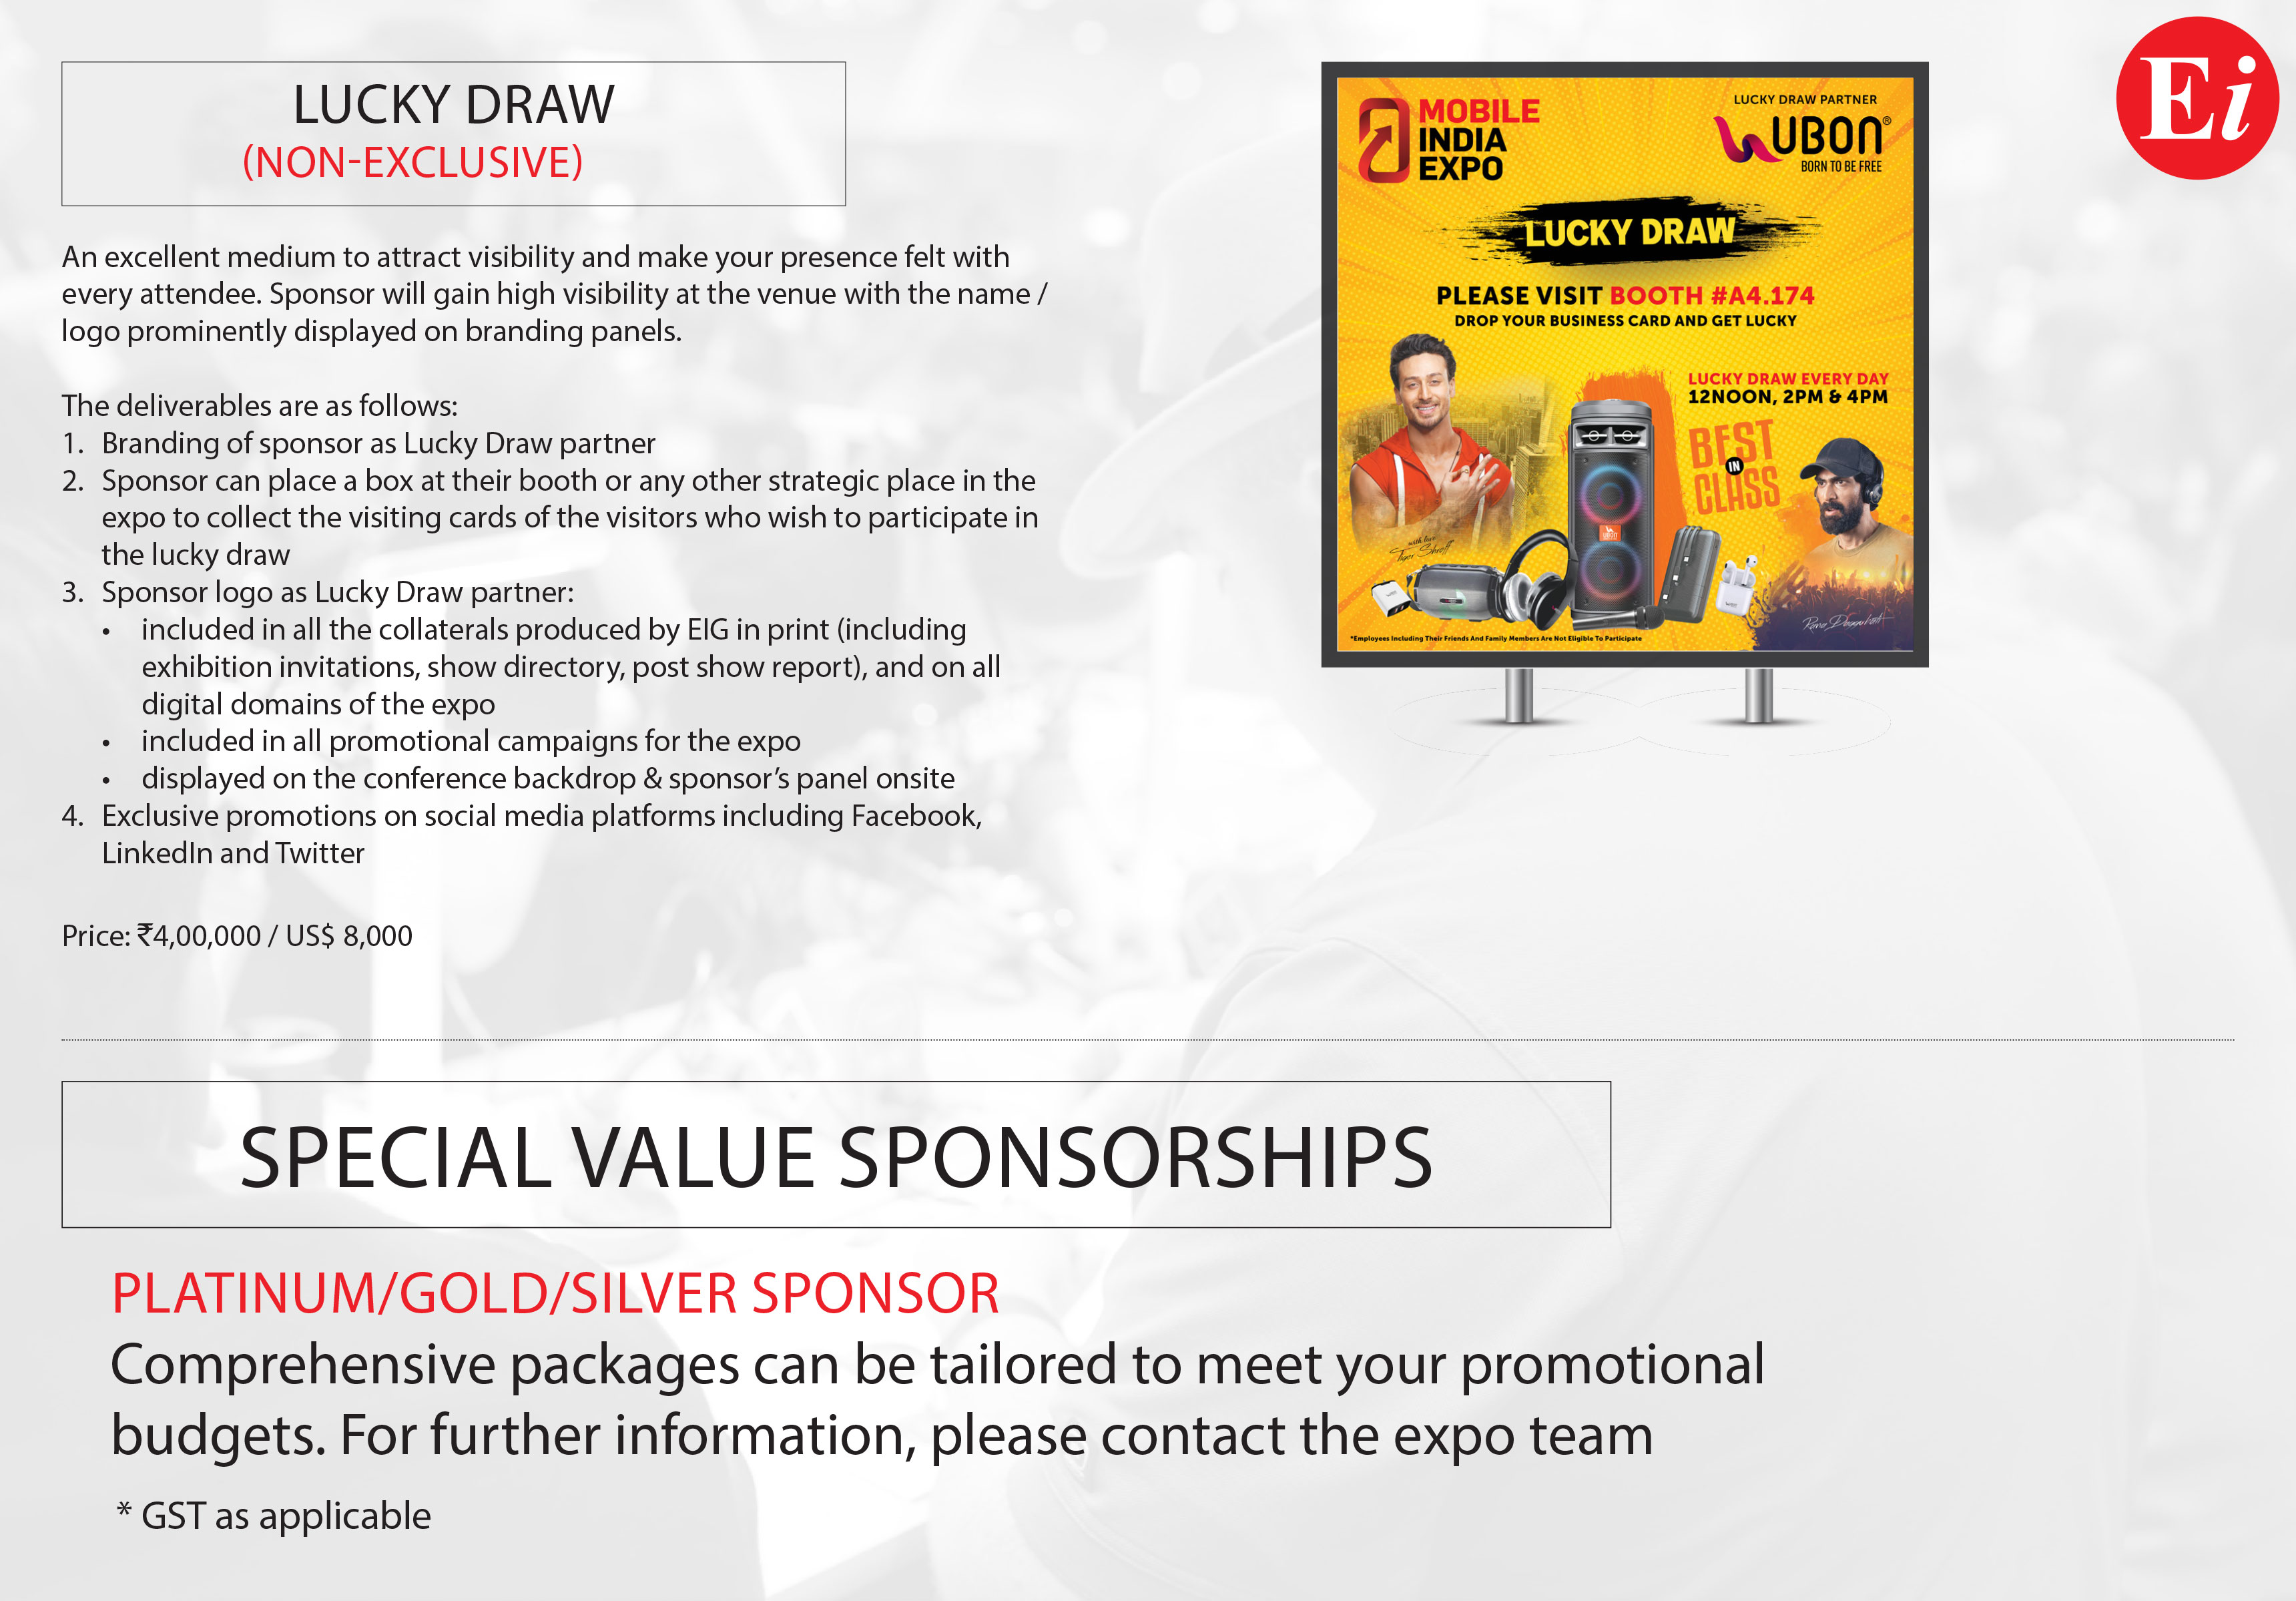 Sponsorship-Opportunities-images